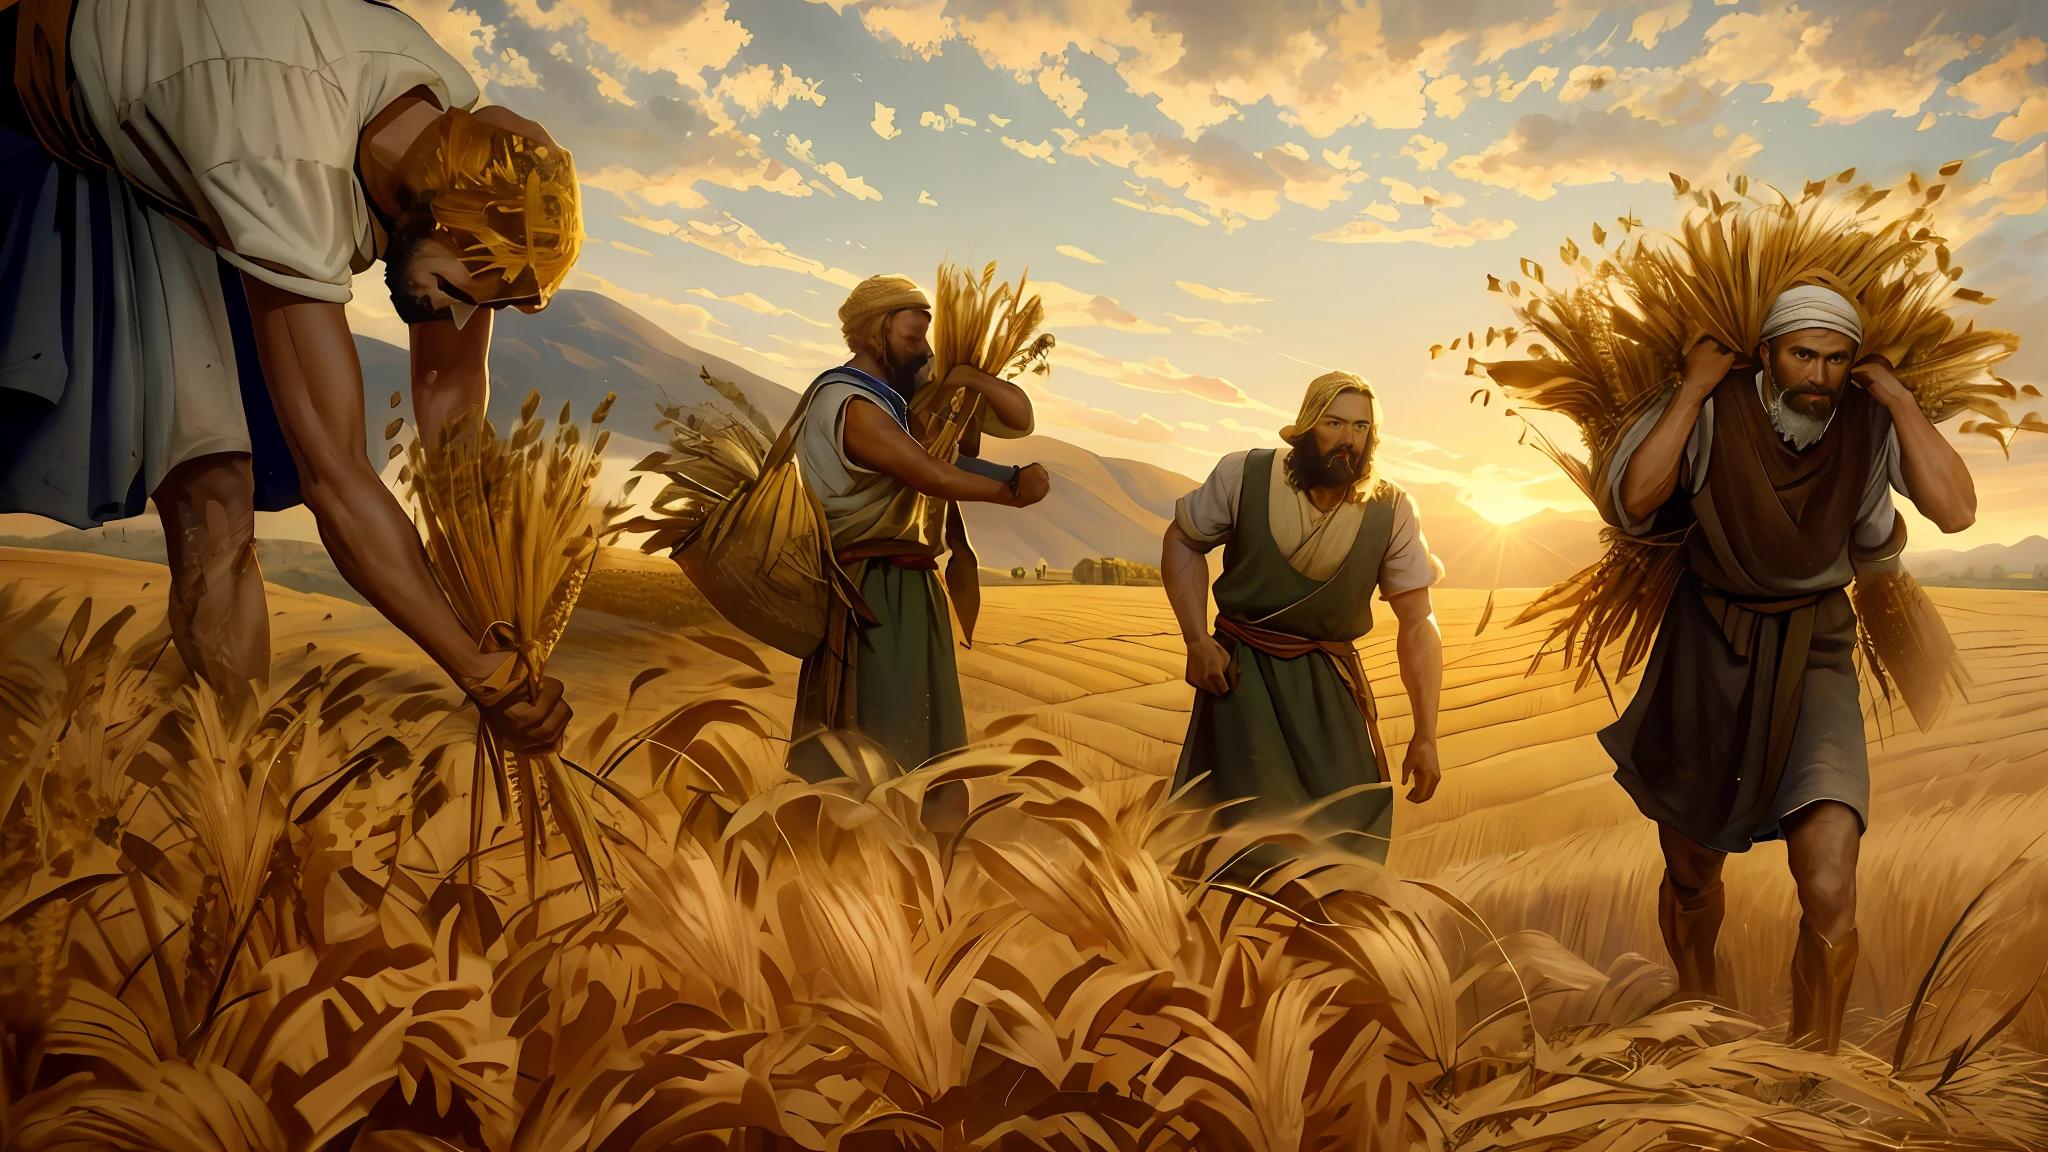 Oil painting, there are three men harvesting wheat in the field, wheat plantation, epic biblical representation, 8k uhd, cinematic lighting, high quality.